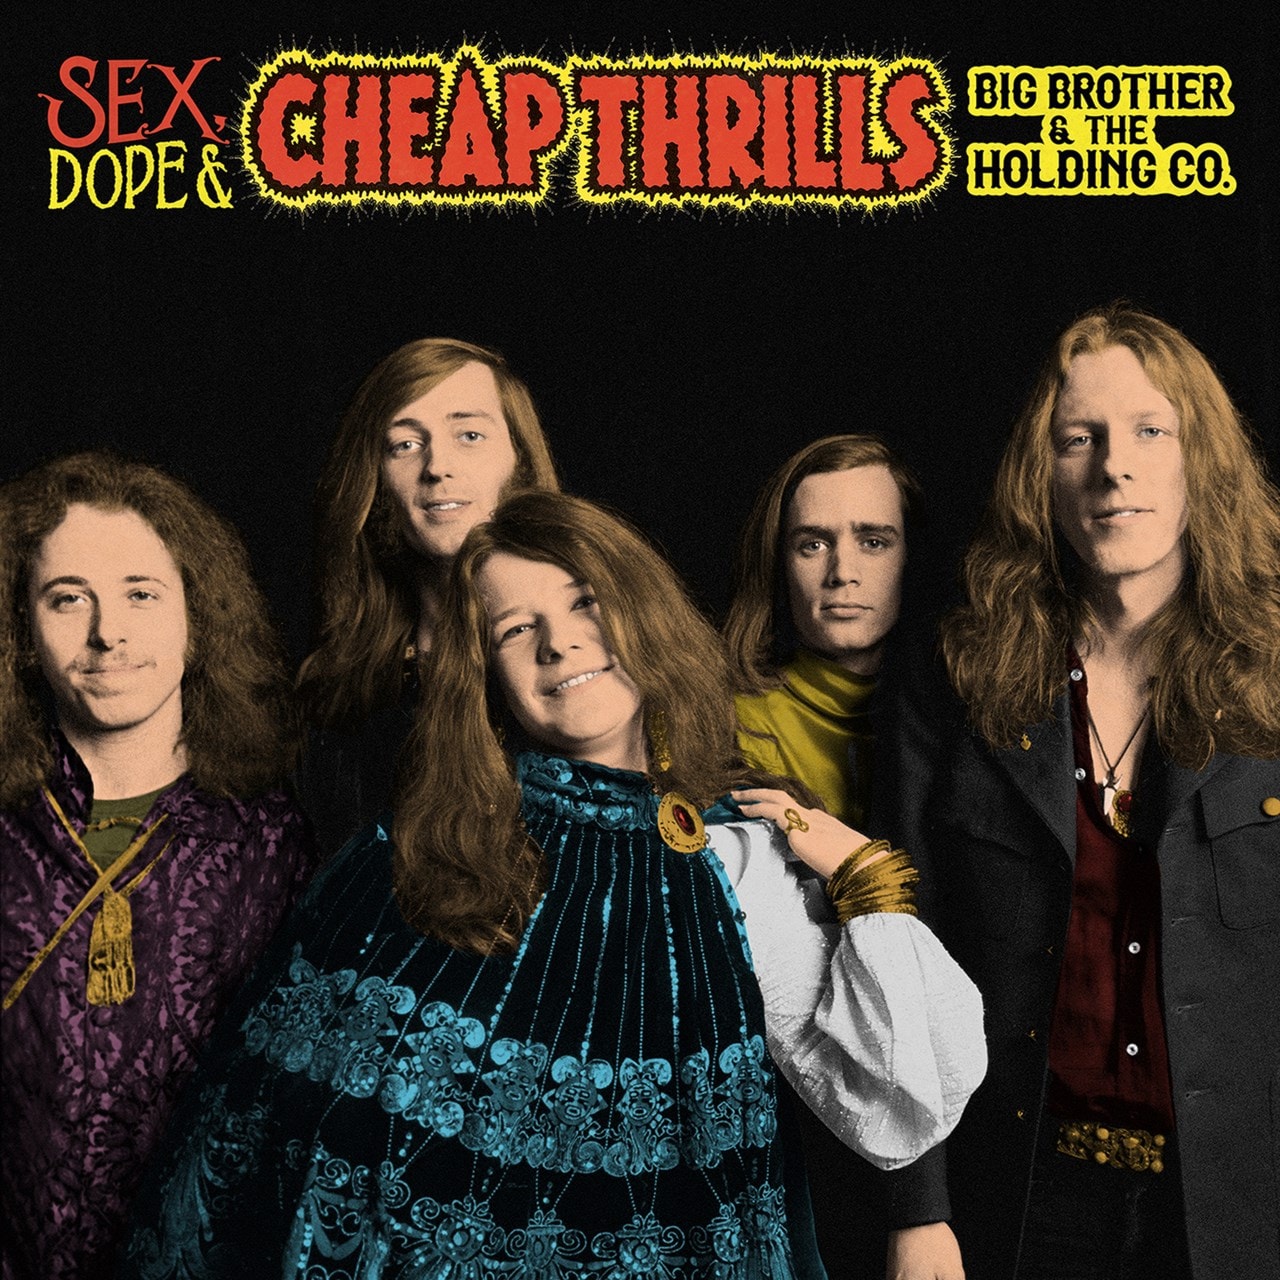 Sex Dope And Cheap Thrills Vinyl 12 Album Free Shipping Over £20 Hmv Store